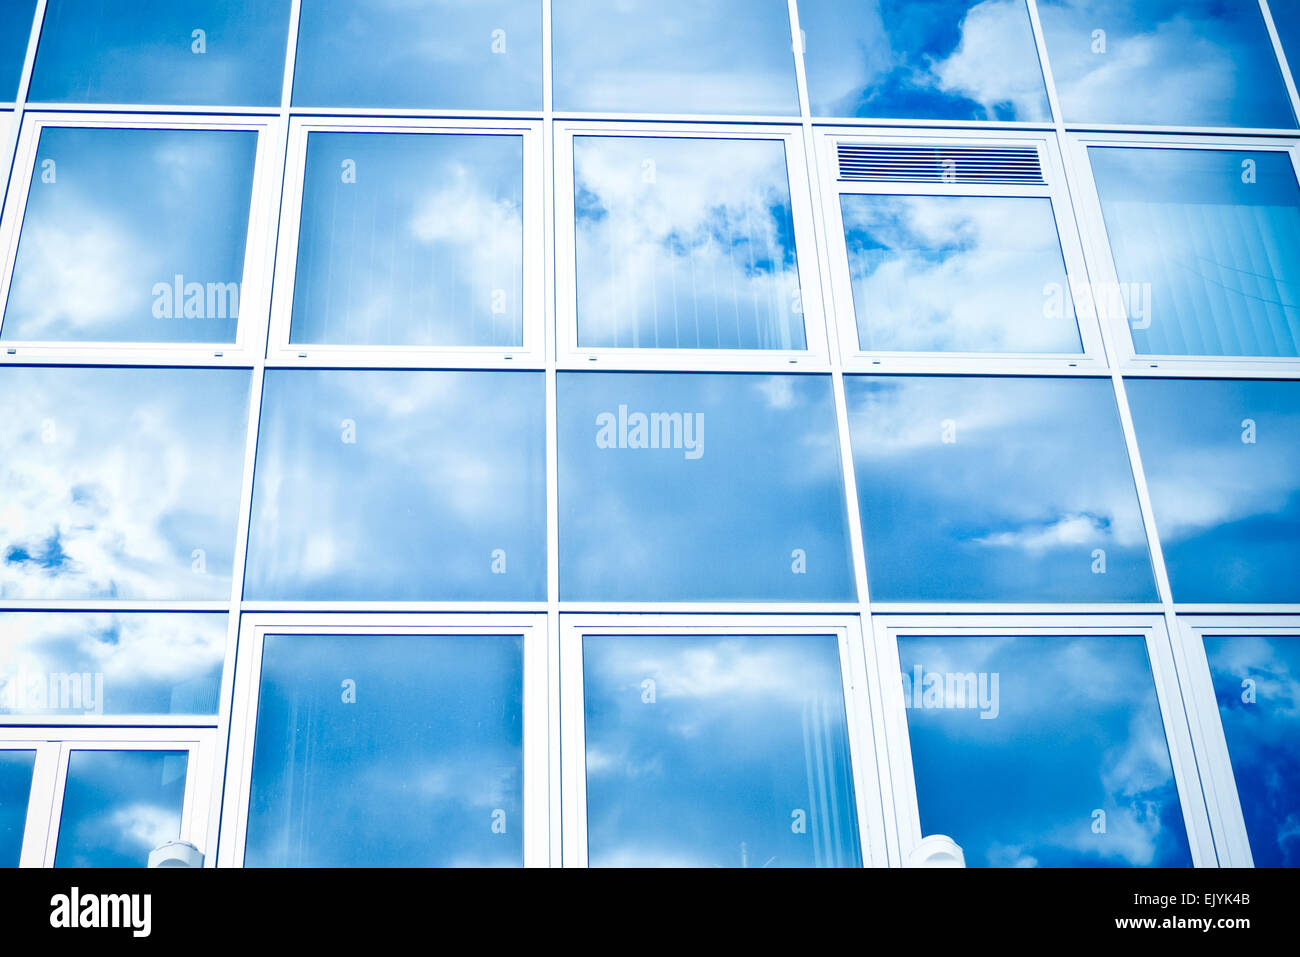 glass windows with cloudy sky reflected Stock Photo